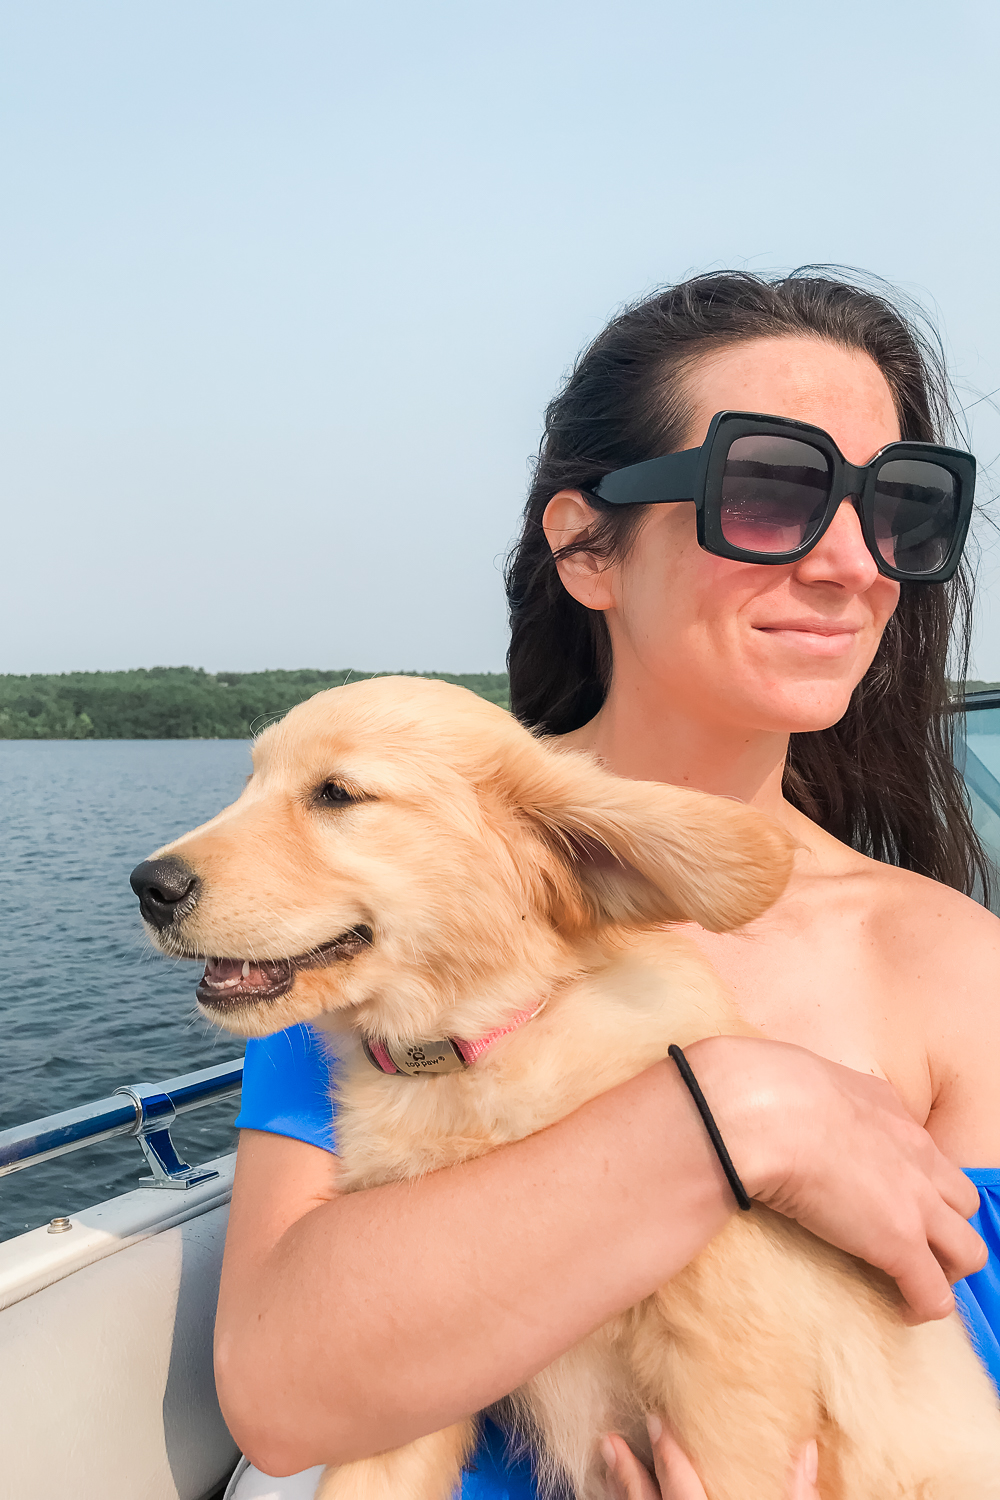 Maine vacation recap, Summer Bucket List: The Best Things to Do in Maine in Summer by southern lifestyle blogger Stephanie Ziajka from Diary of a Debutante, Maine bucket list, things to do in Maine, Lake Damariscotta, things to do in Damariscotta Maine